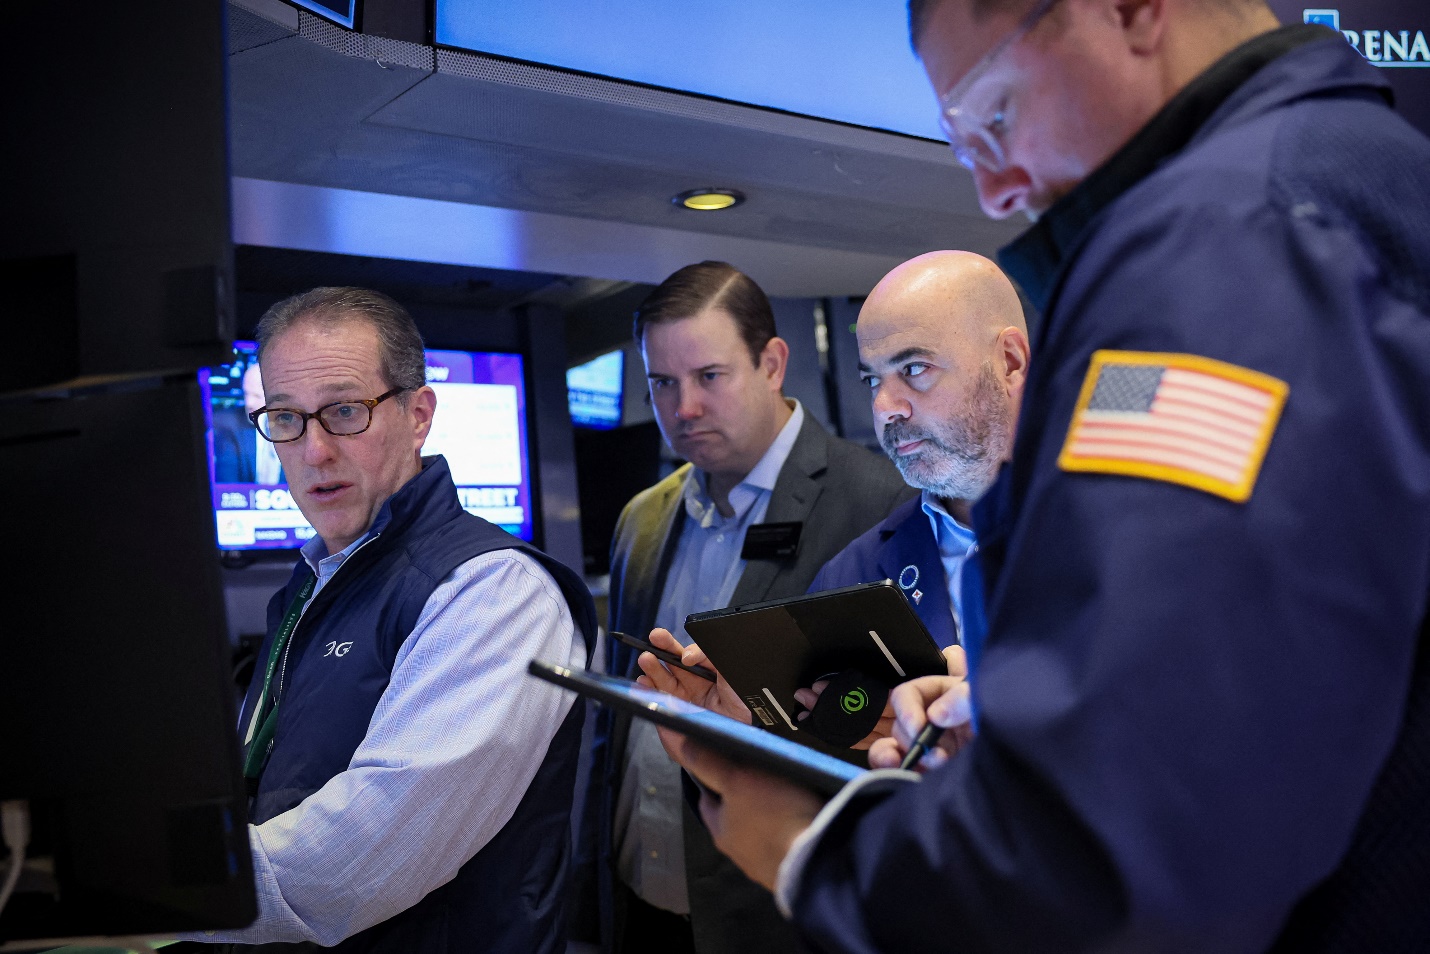 Traders work on the floor of the NYSE in New York